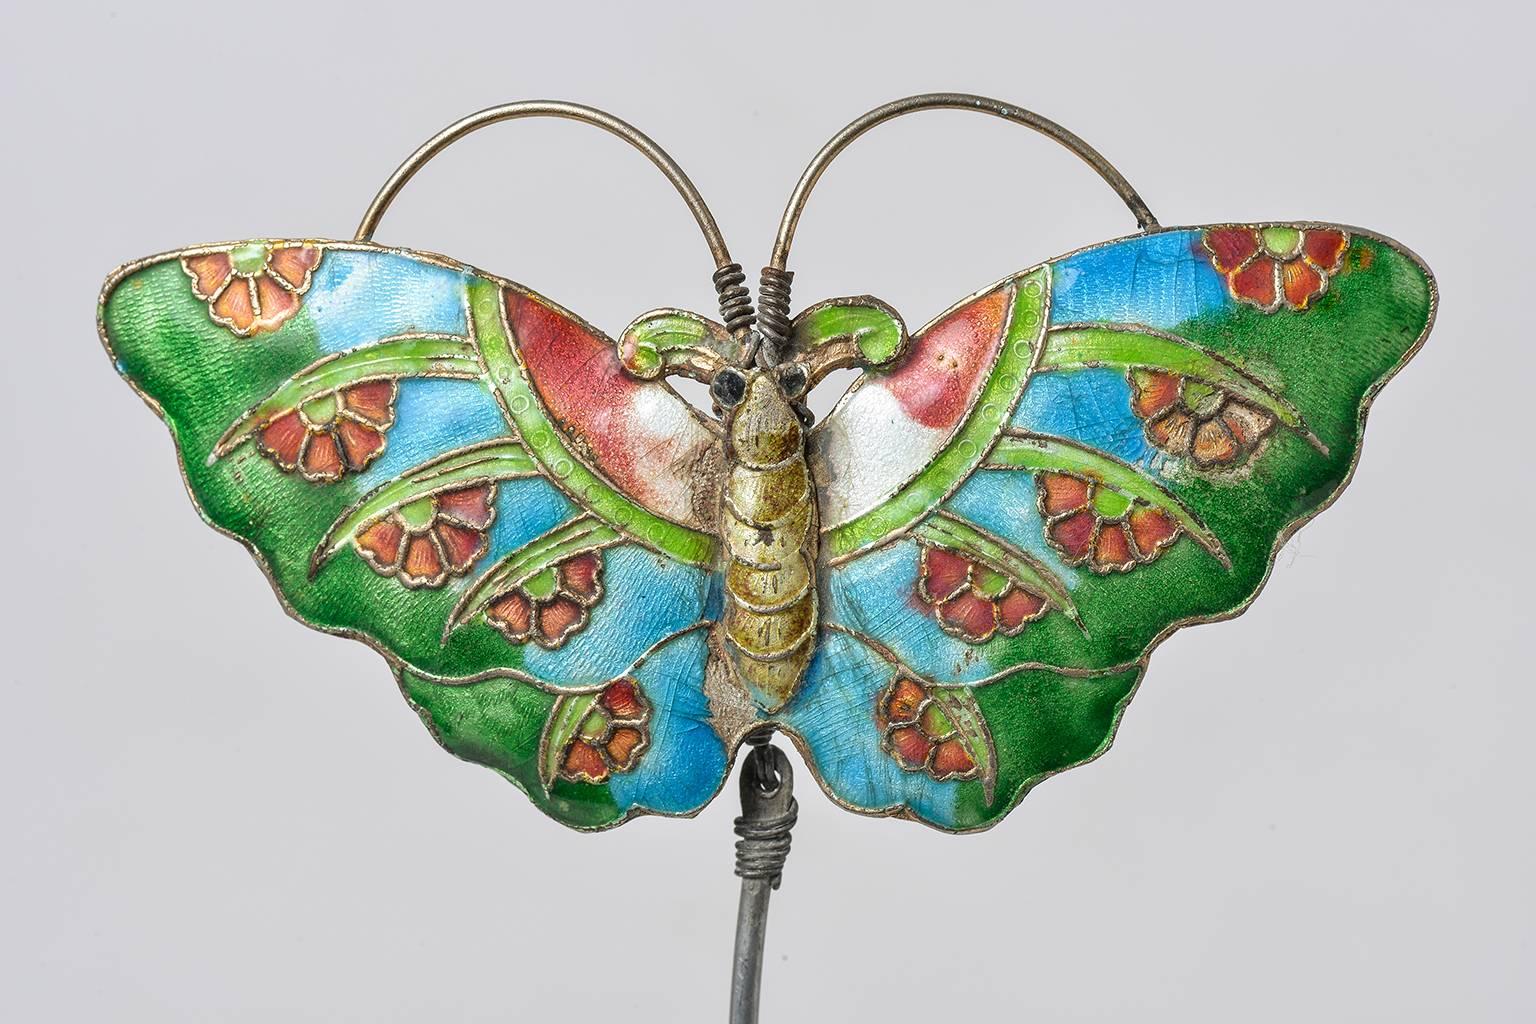 G/316, Old and charming nail  Chinese hair pin shaped like a butterfly,
 Ching - Kuang-su dinasty -